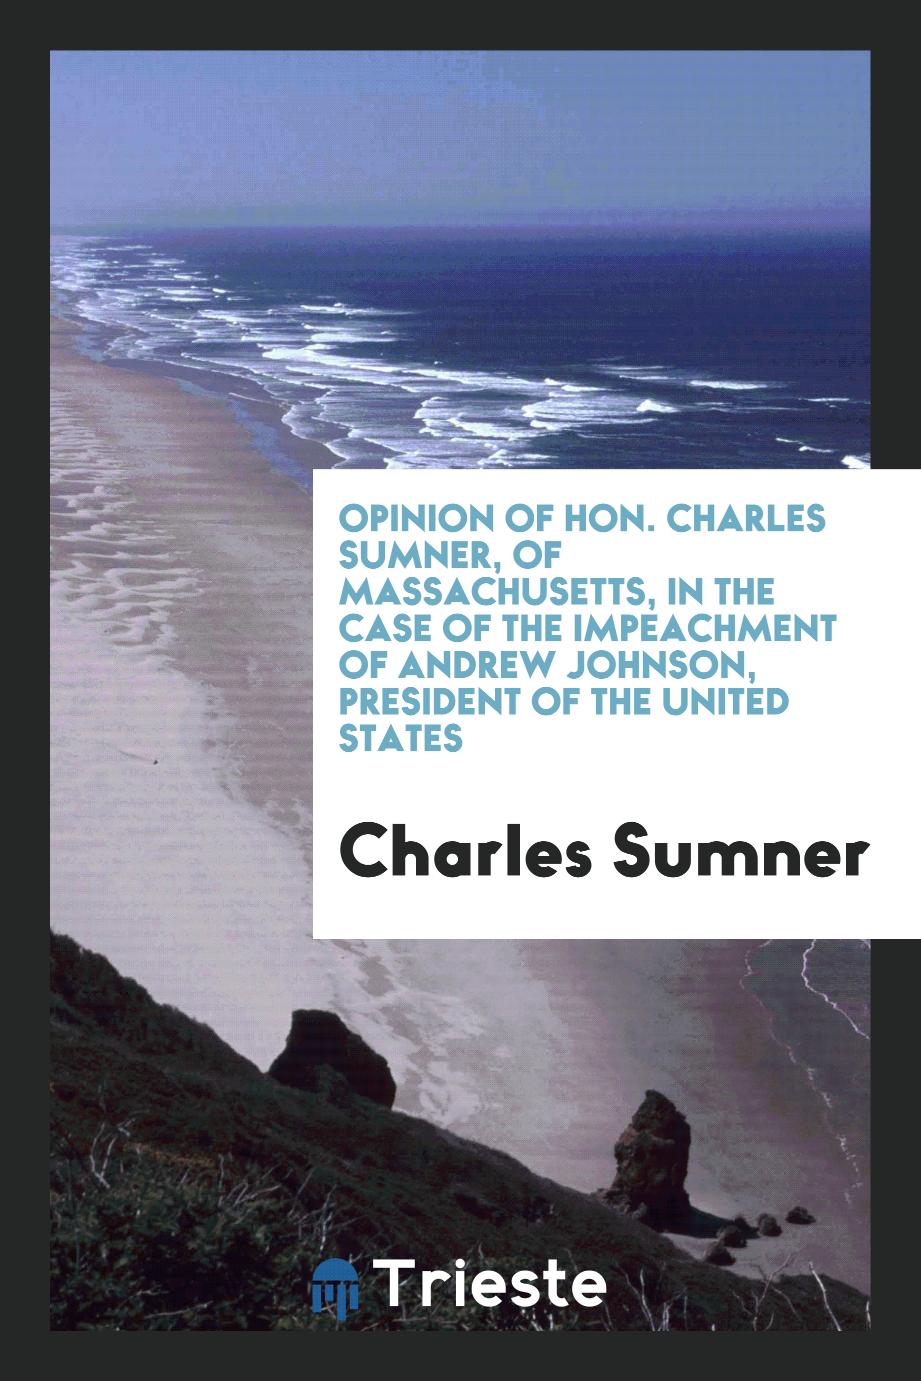 Opinion of Hon. Charles Sumner, of Massachusetts, in the Case of the impeachment of Andrew Johnson, President of the United States